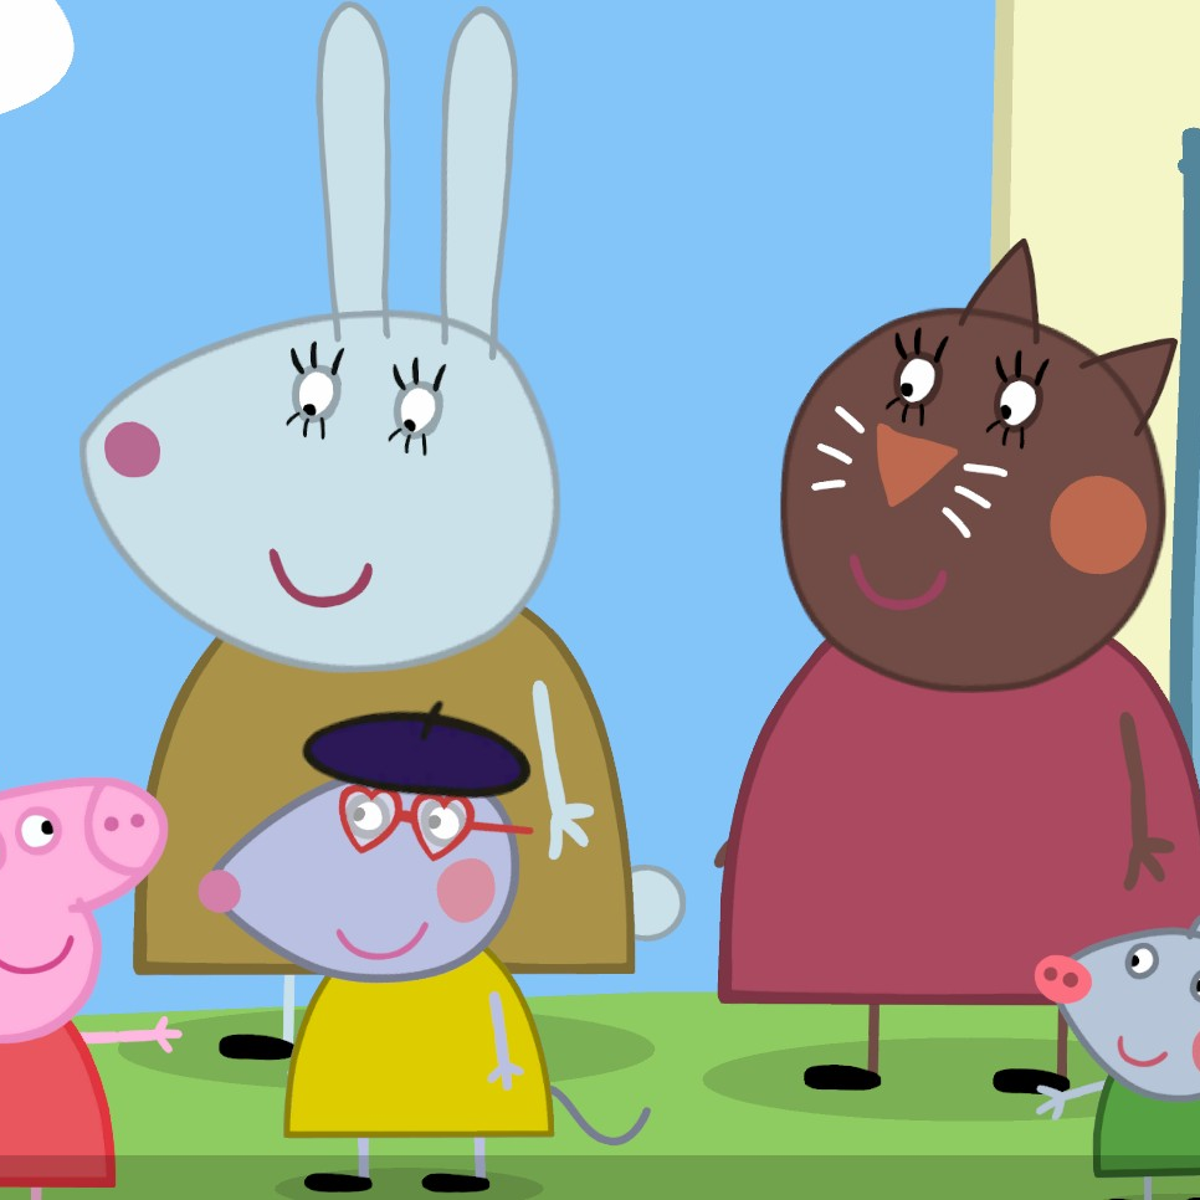 Peppa Pig game developer hopes inclusive family character creator sparks  healthy conversations